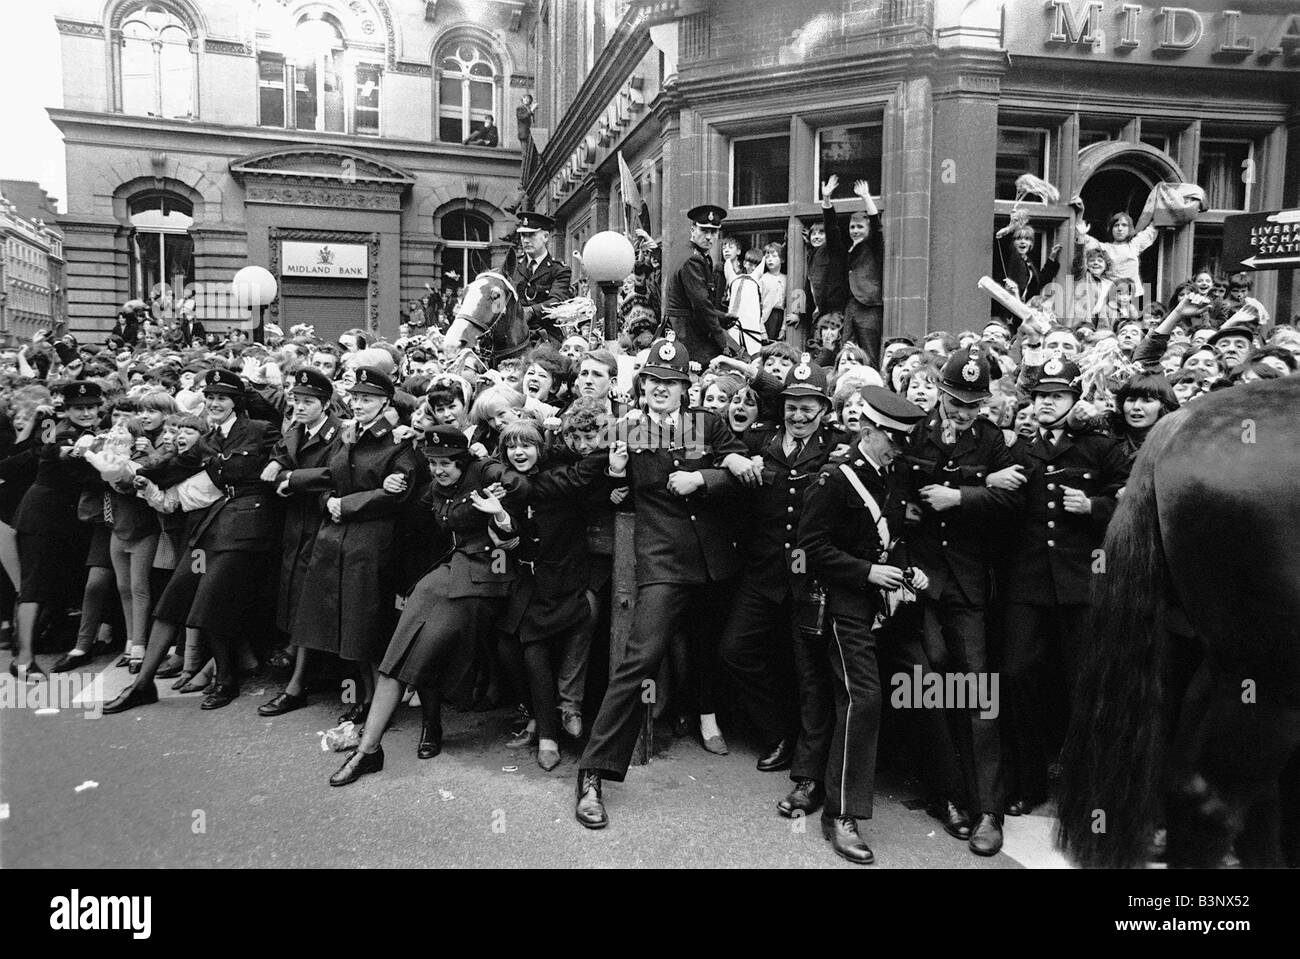 The Beatles July 1964 Crowds of fans outside the ABC theatre as the Beatles arrive controlled by police Stock Photo